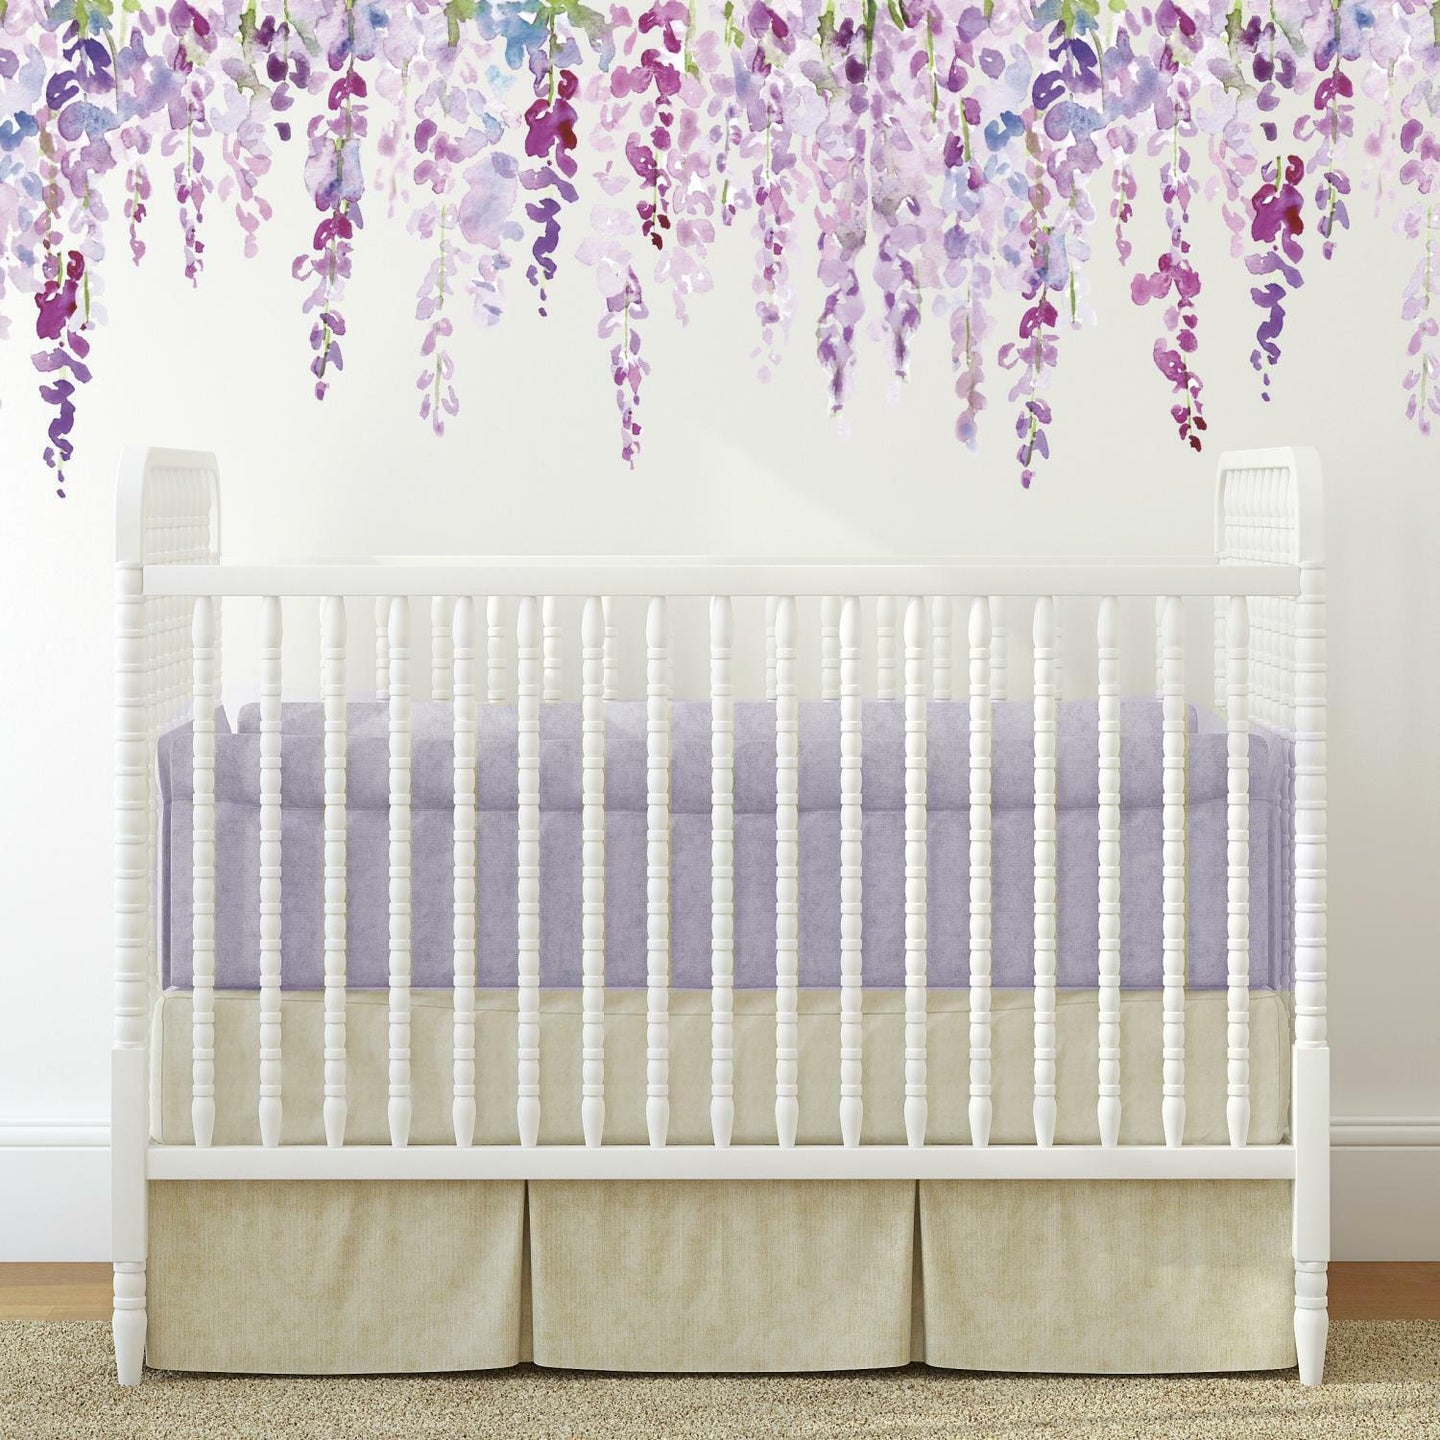 WATERCOLOR WISTERIA PEEL AND STICK GIANT WALL DECALS